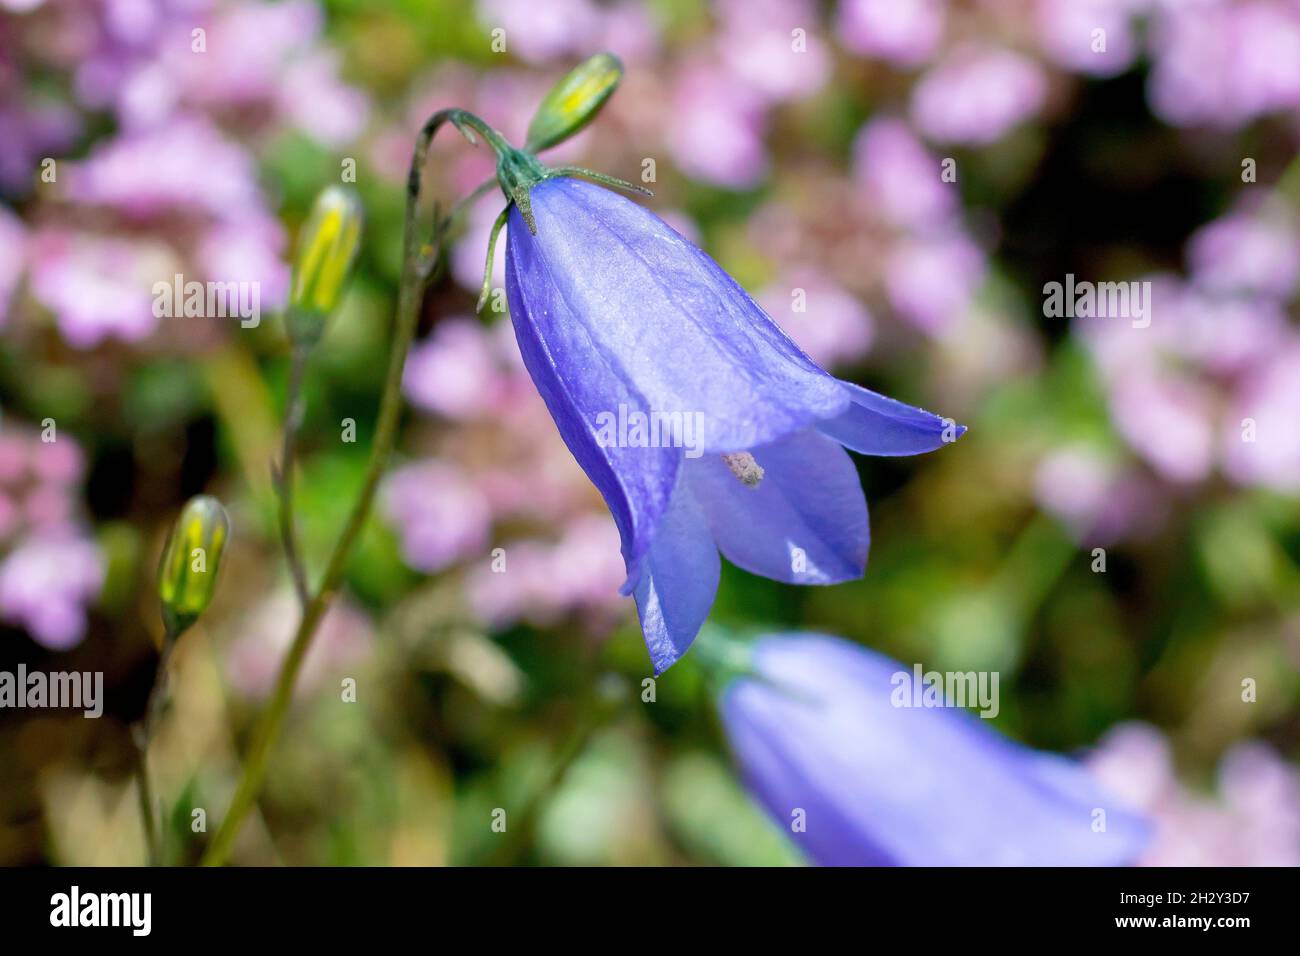 Harebell or Scottish Bluebell (campanula rotundifolia), close up of a single blue flower against a backdrop of pink flowers. Stock Photo